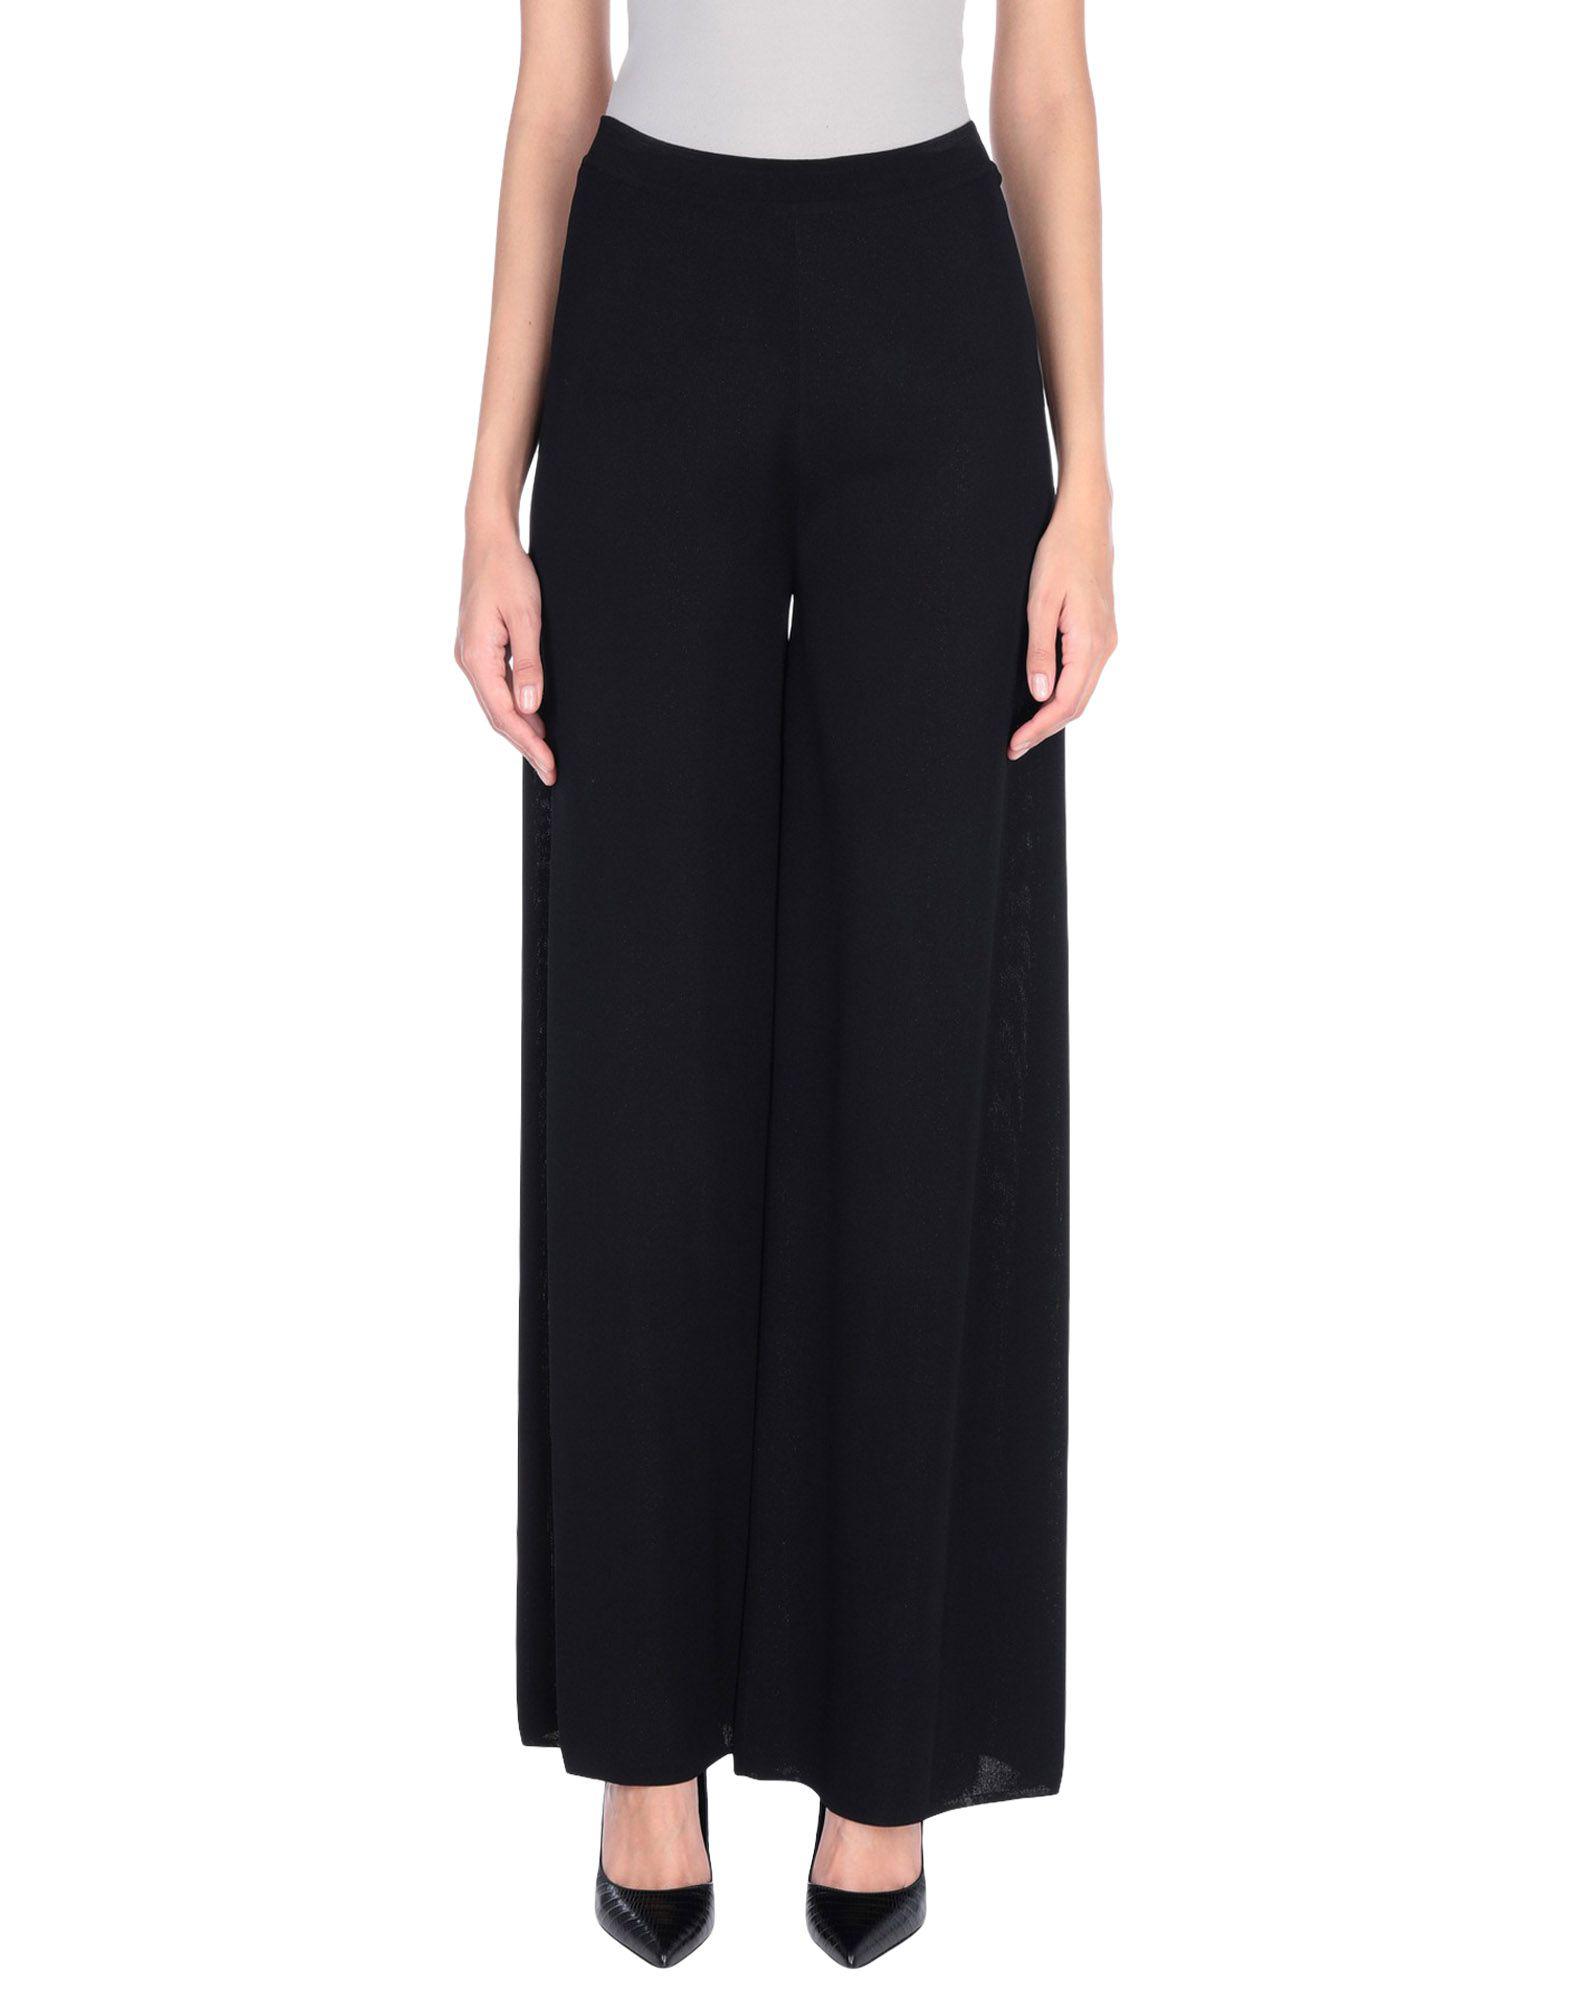 Gentry Portofino Synthetic Casual Pants in Black - Lyst